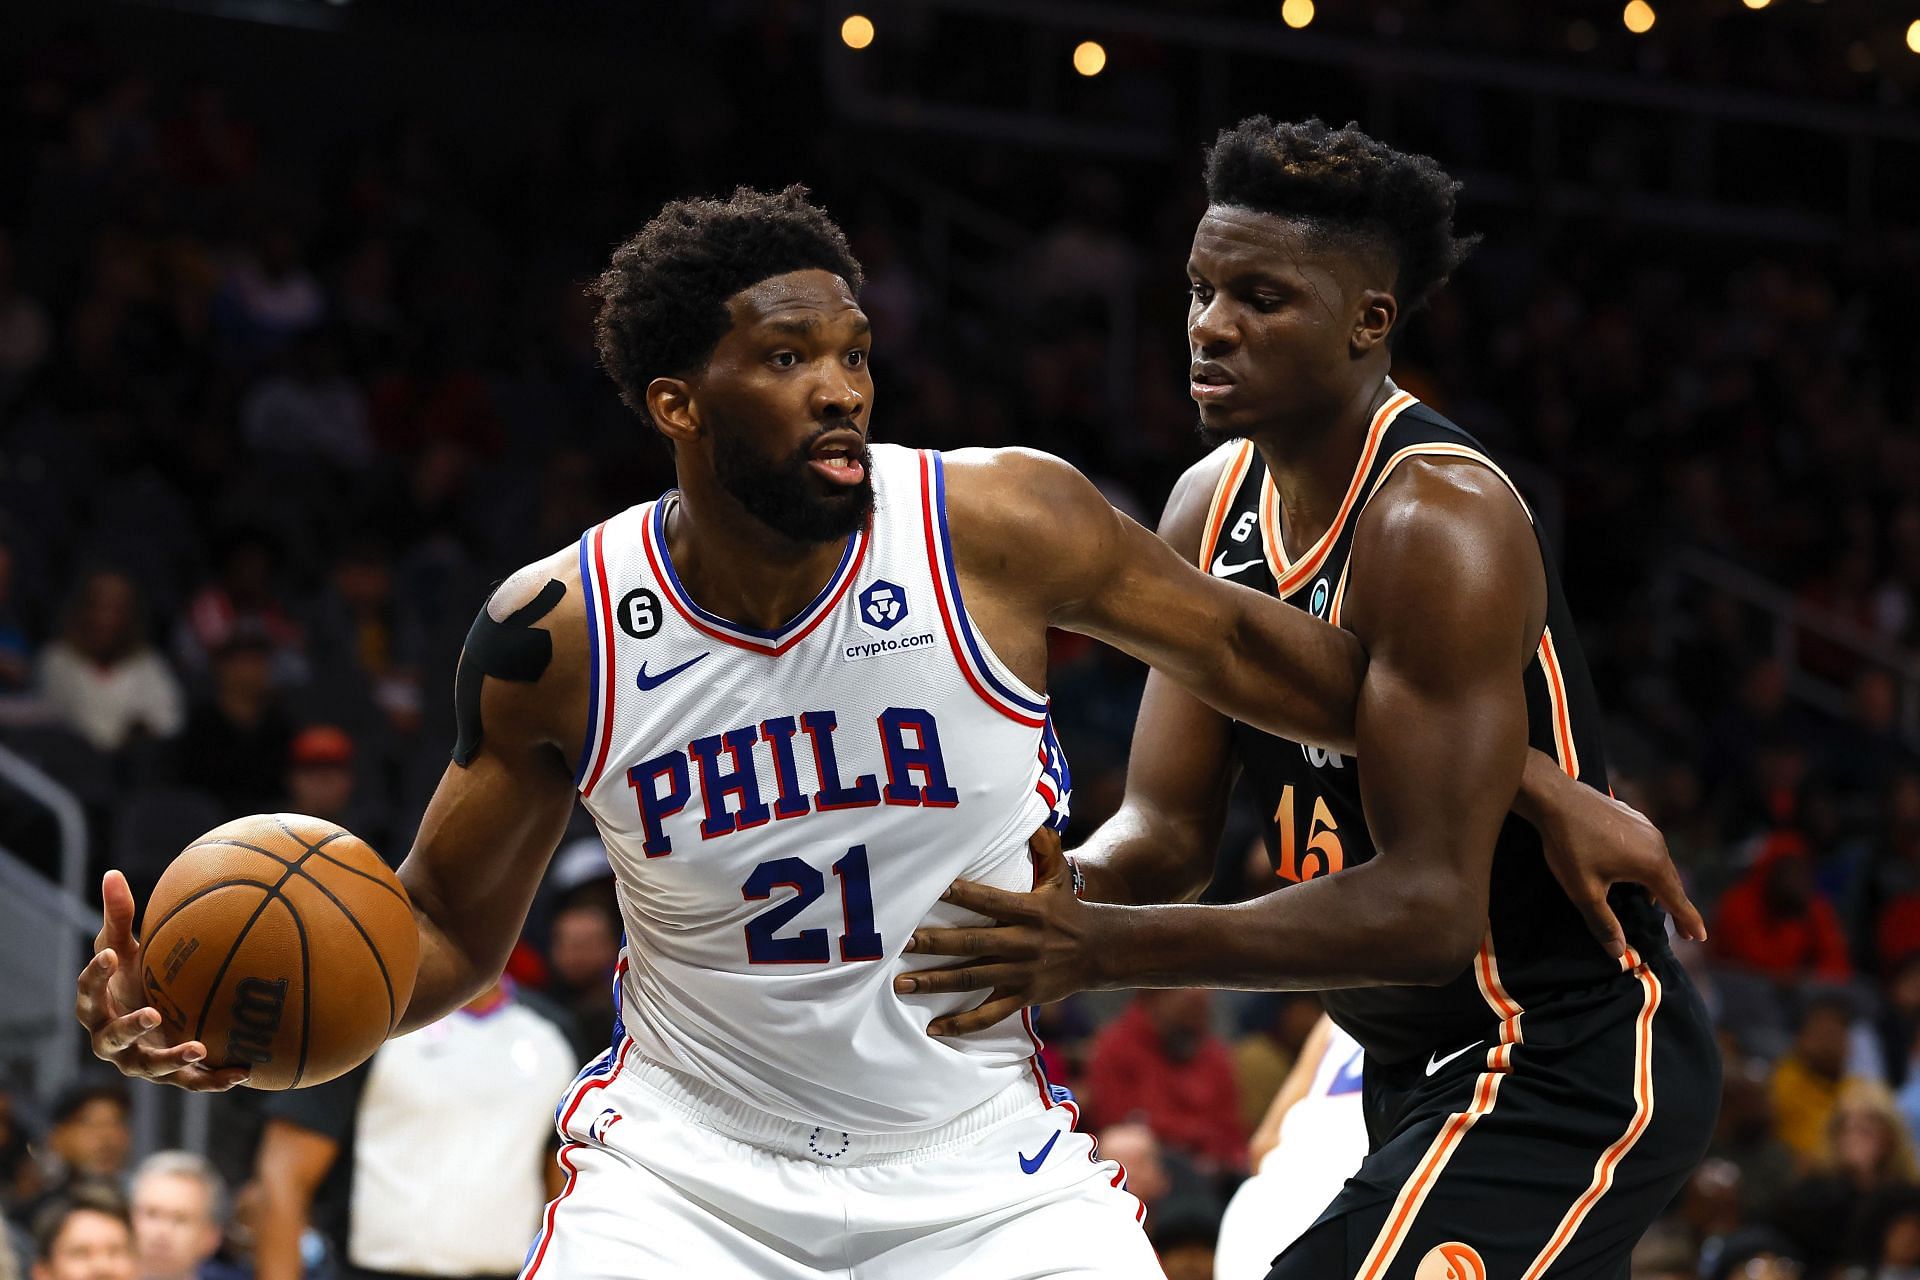 Philadelphia 76ers superstar center Joel Embiid is vying for his first MVP.